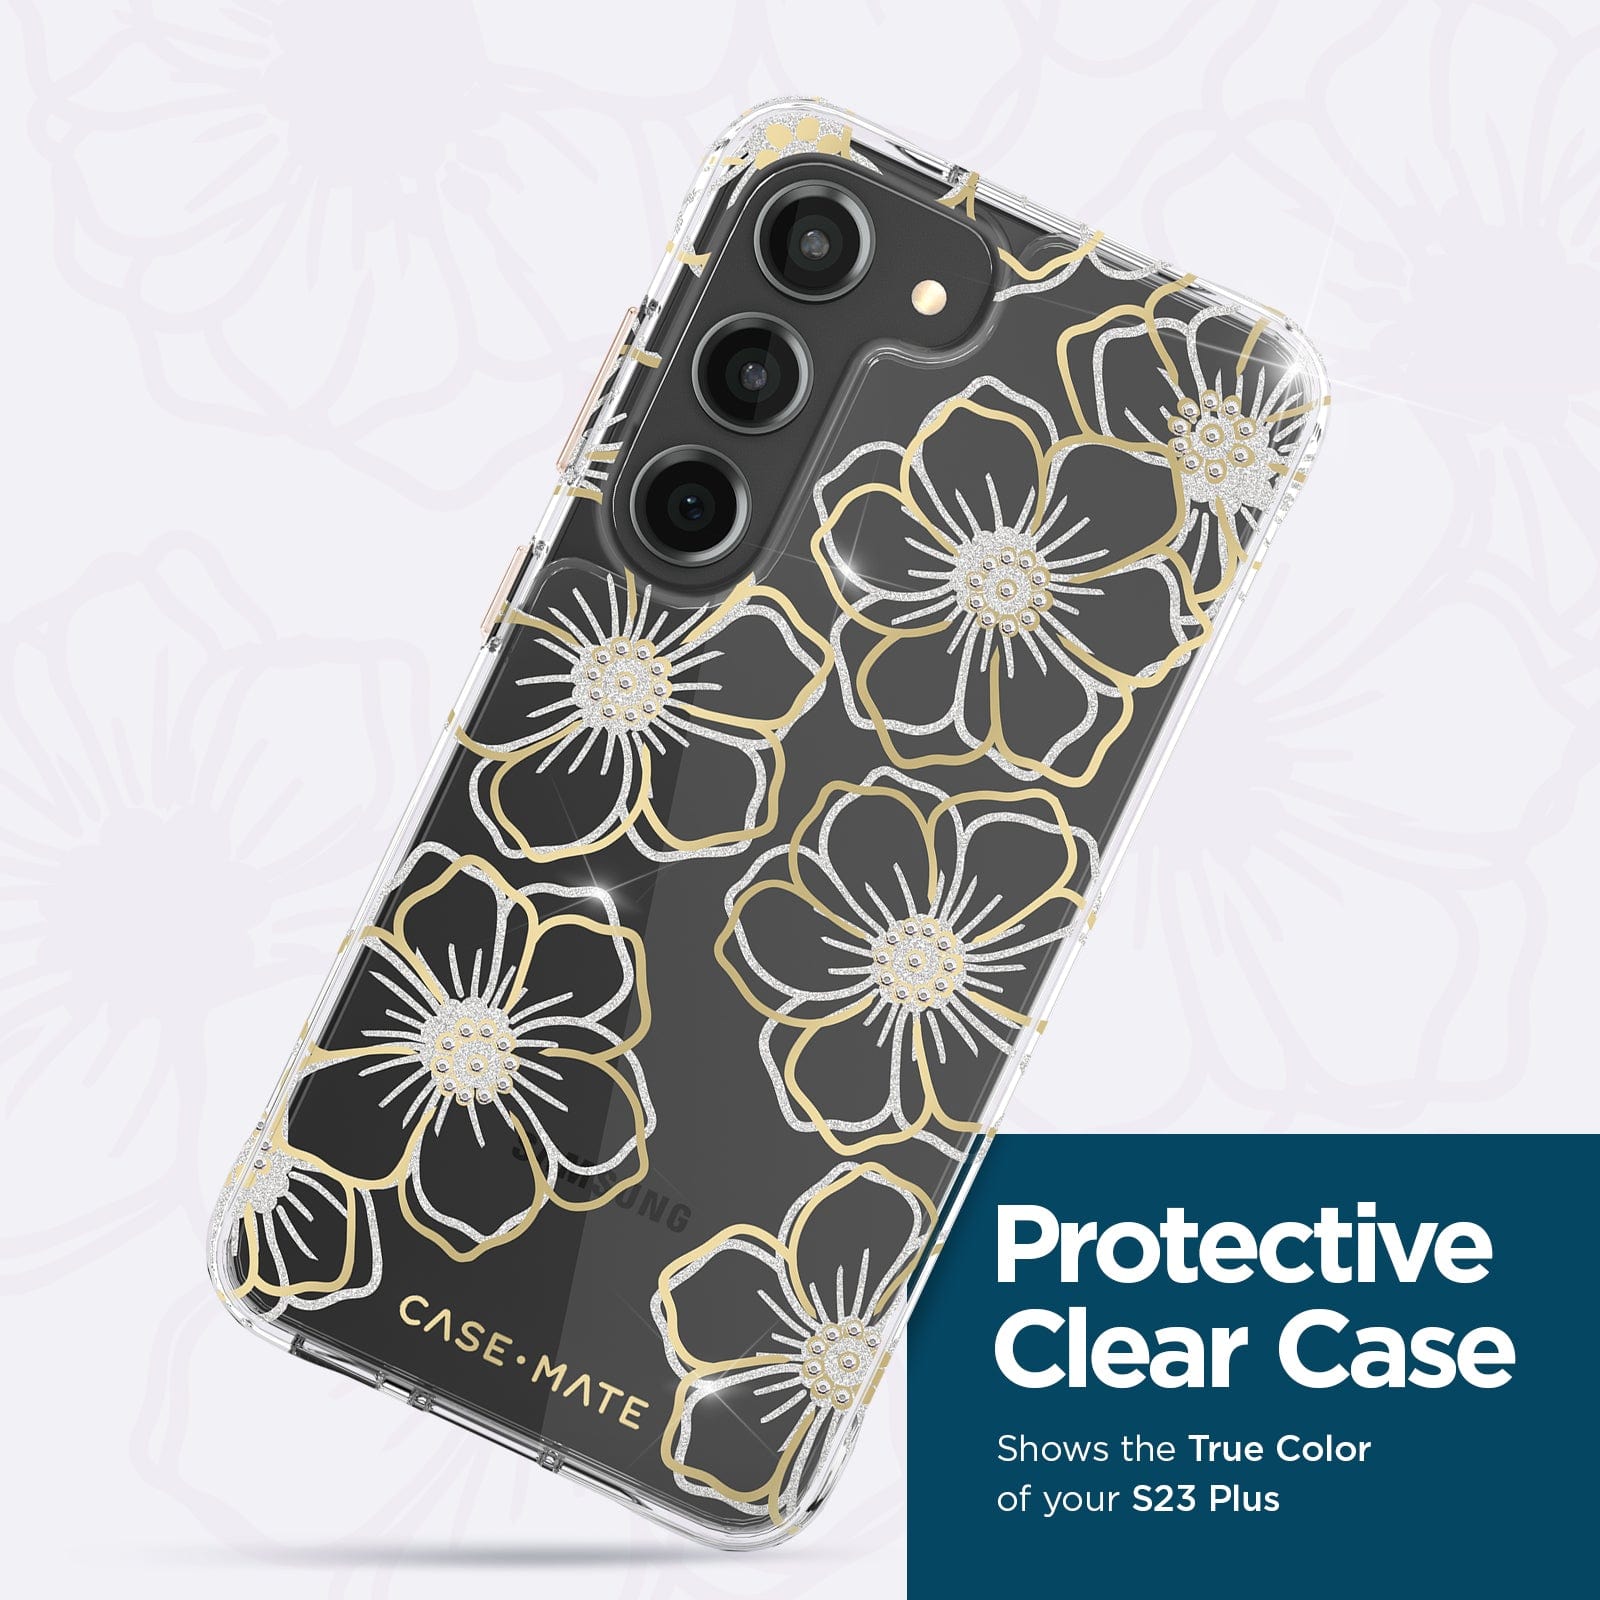 PROTECTIVE CLEAR CASE. SHOWS THE TRUE COLOR OF YOUR S23 PLUS. 